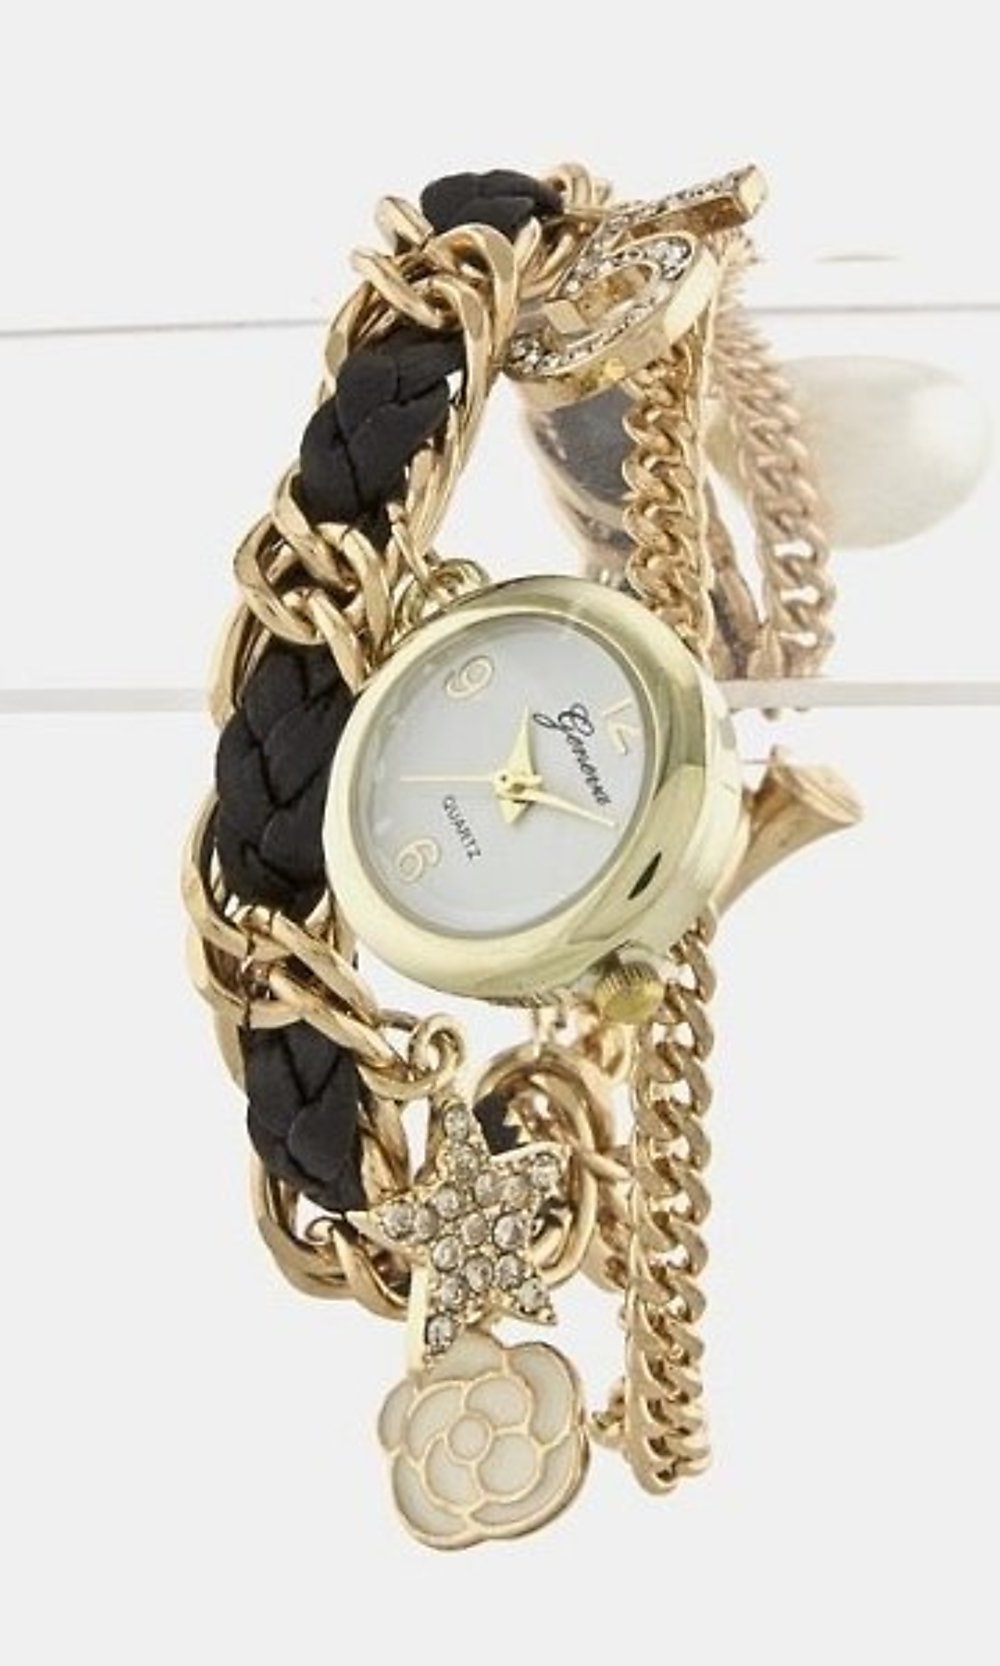 Artini-Rope Chain Charm Bracelet with Watch